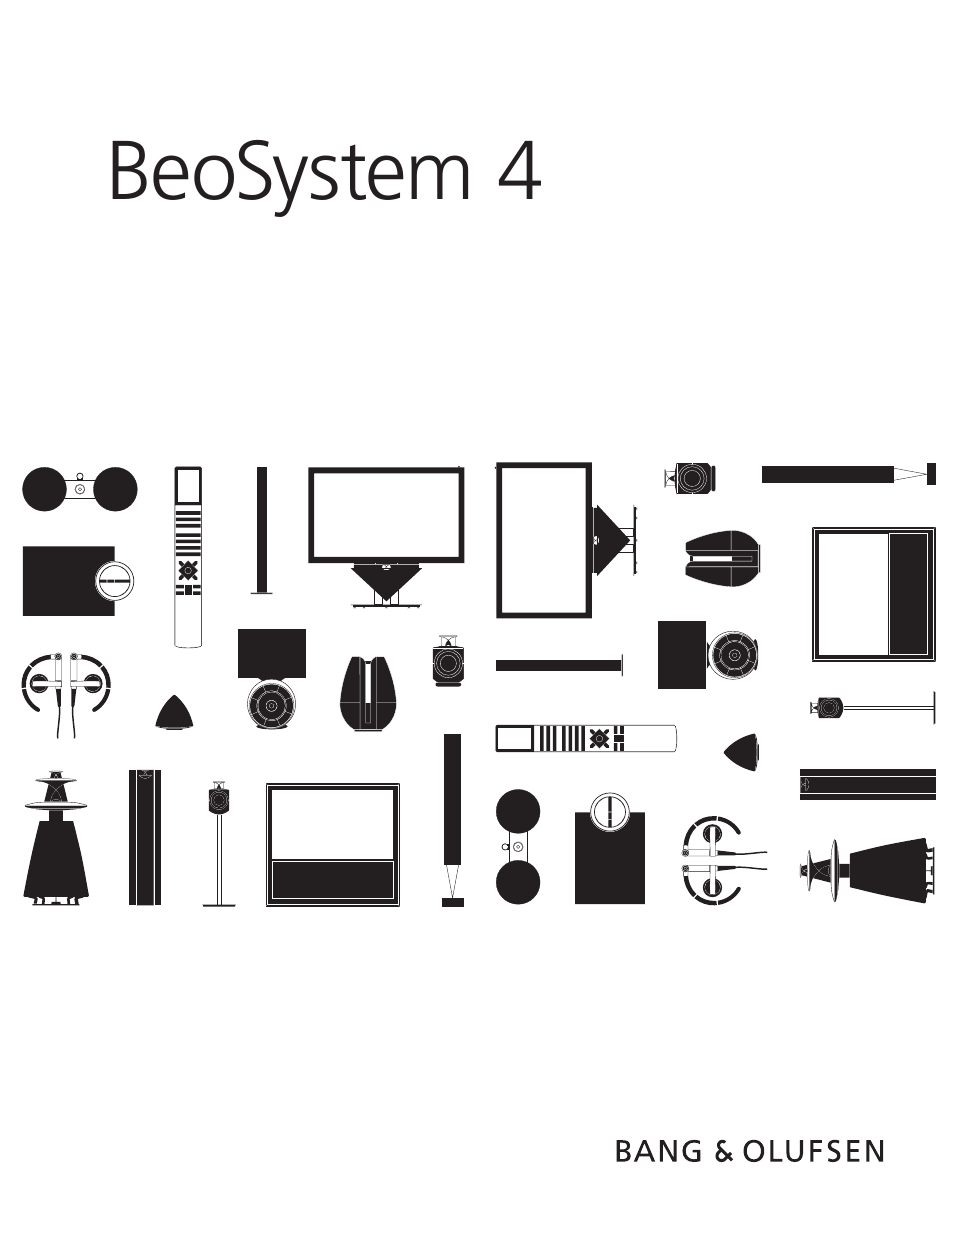 BeoSystem 4 with Beo4 Getting Started